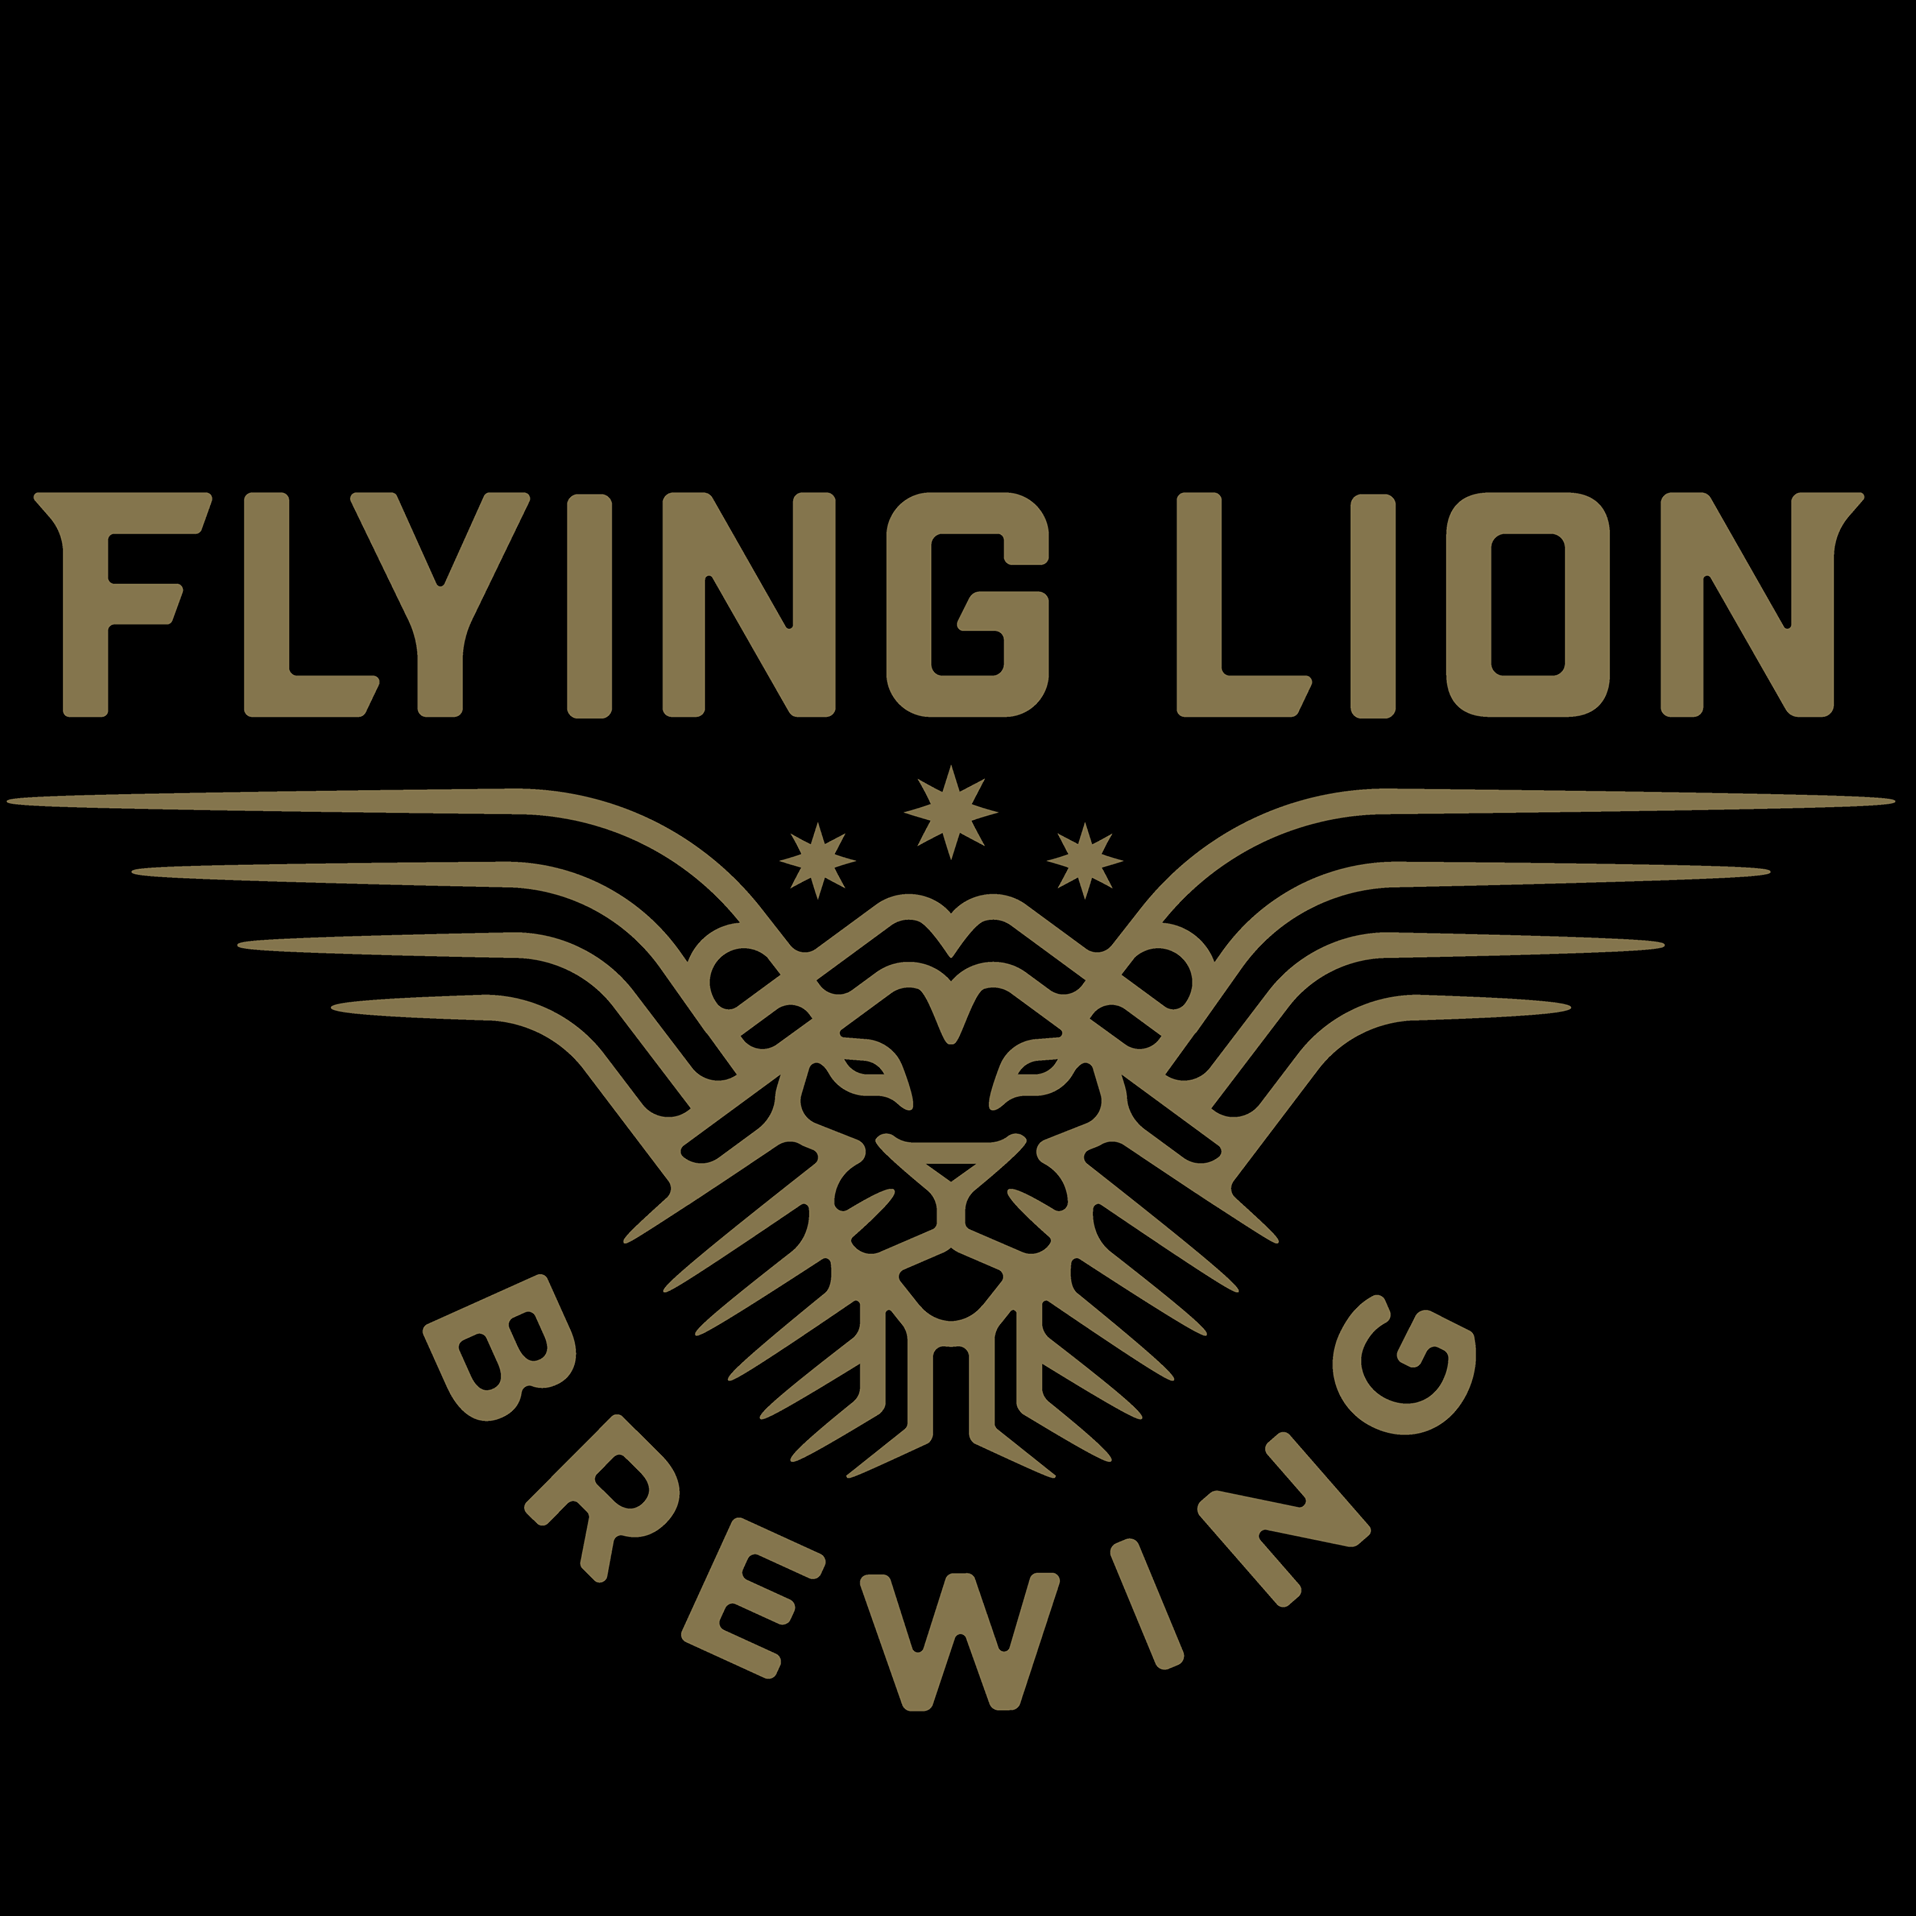 Company logo of Flying Lion Brewing